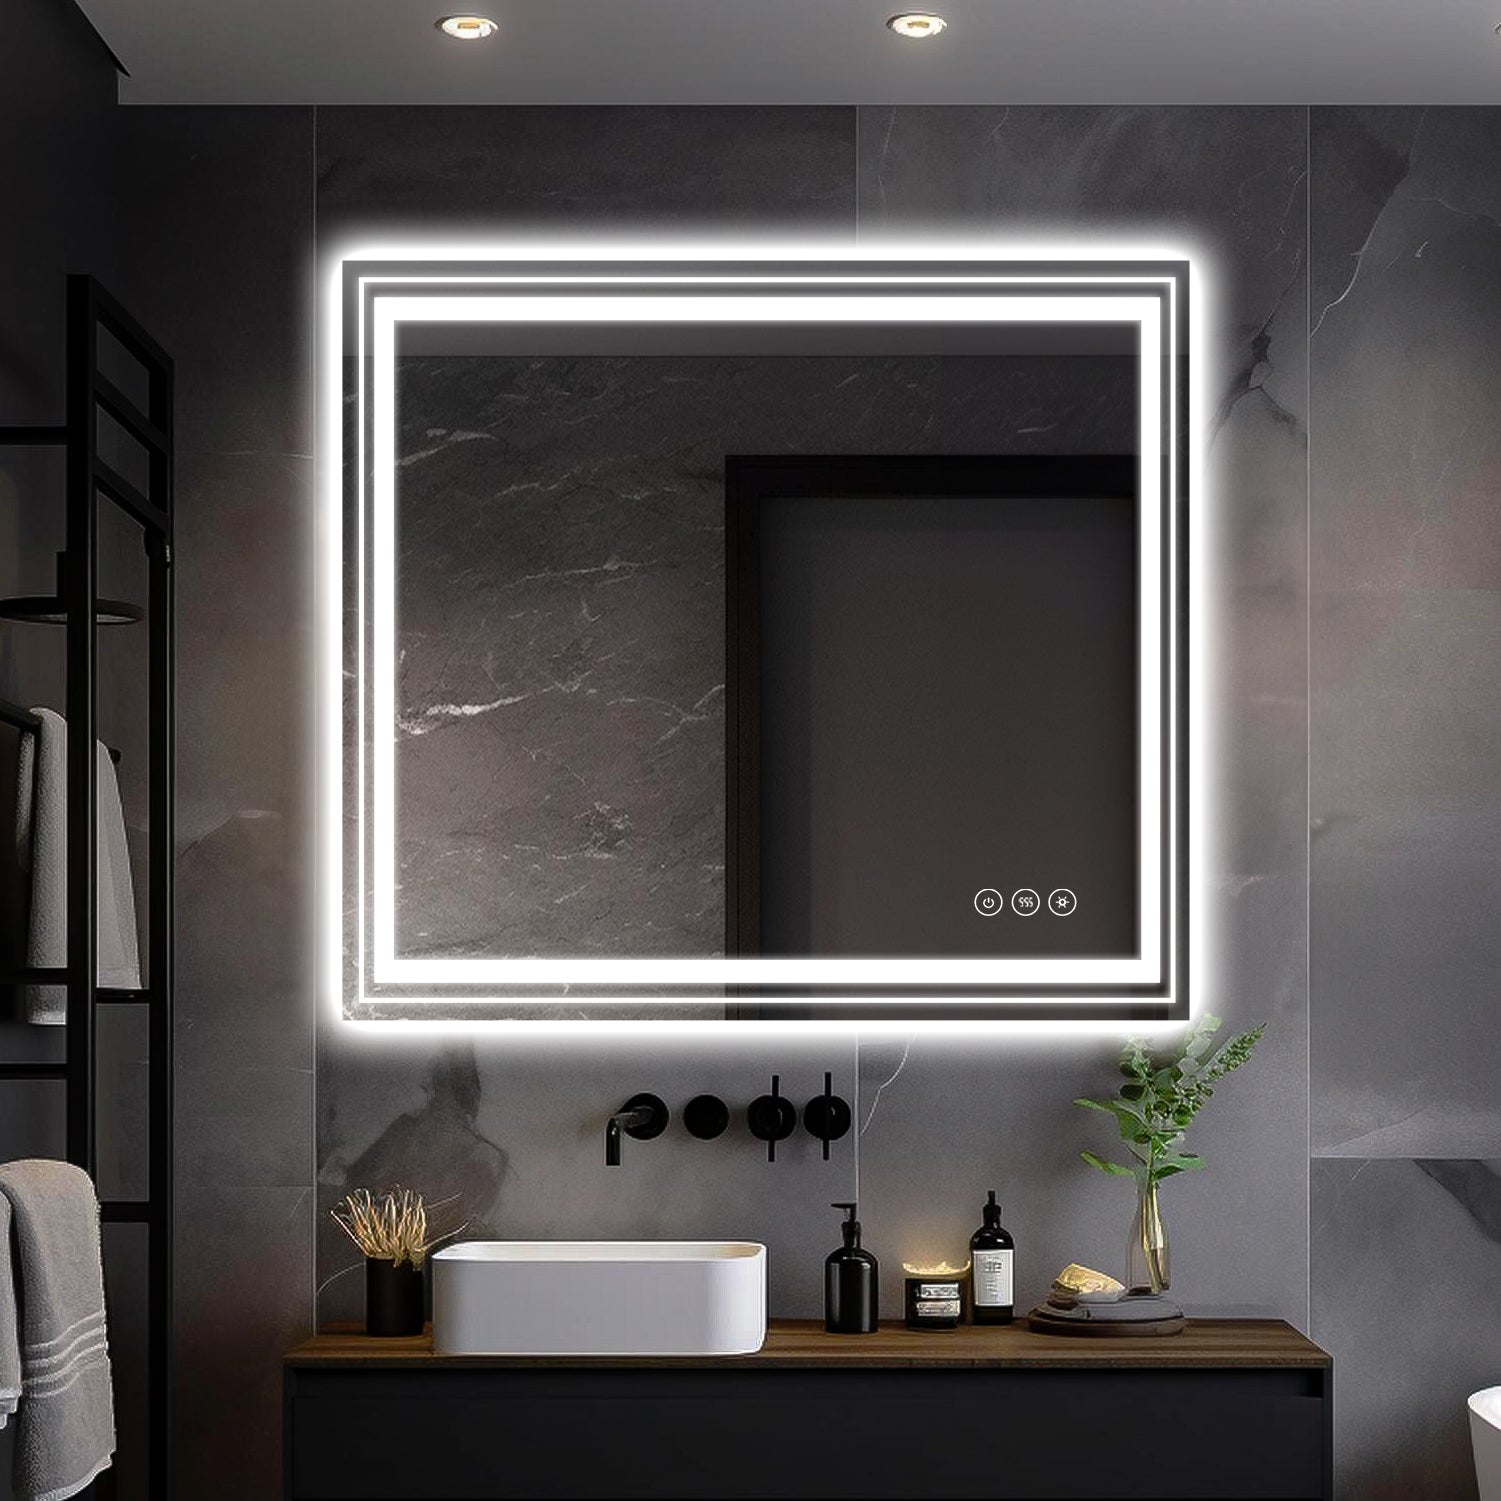 36 x 30 Inch LED Dimmable Memory Touch Bathroom Vanity Mirrors